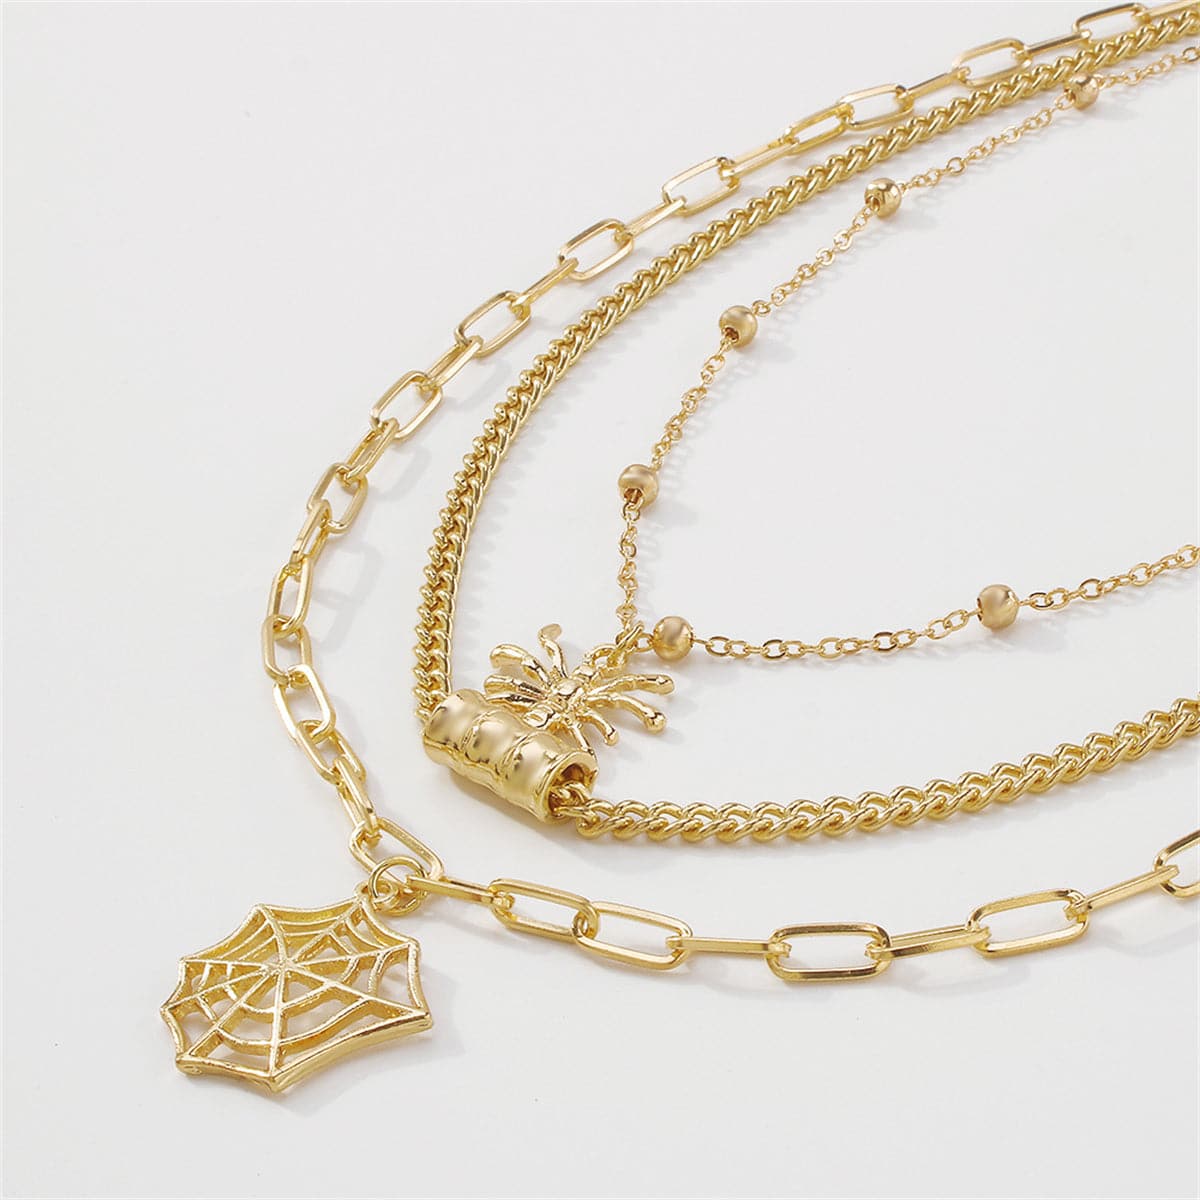 18K Gold-Plated Spider Cobweb Layered Pendant Necklace